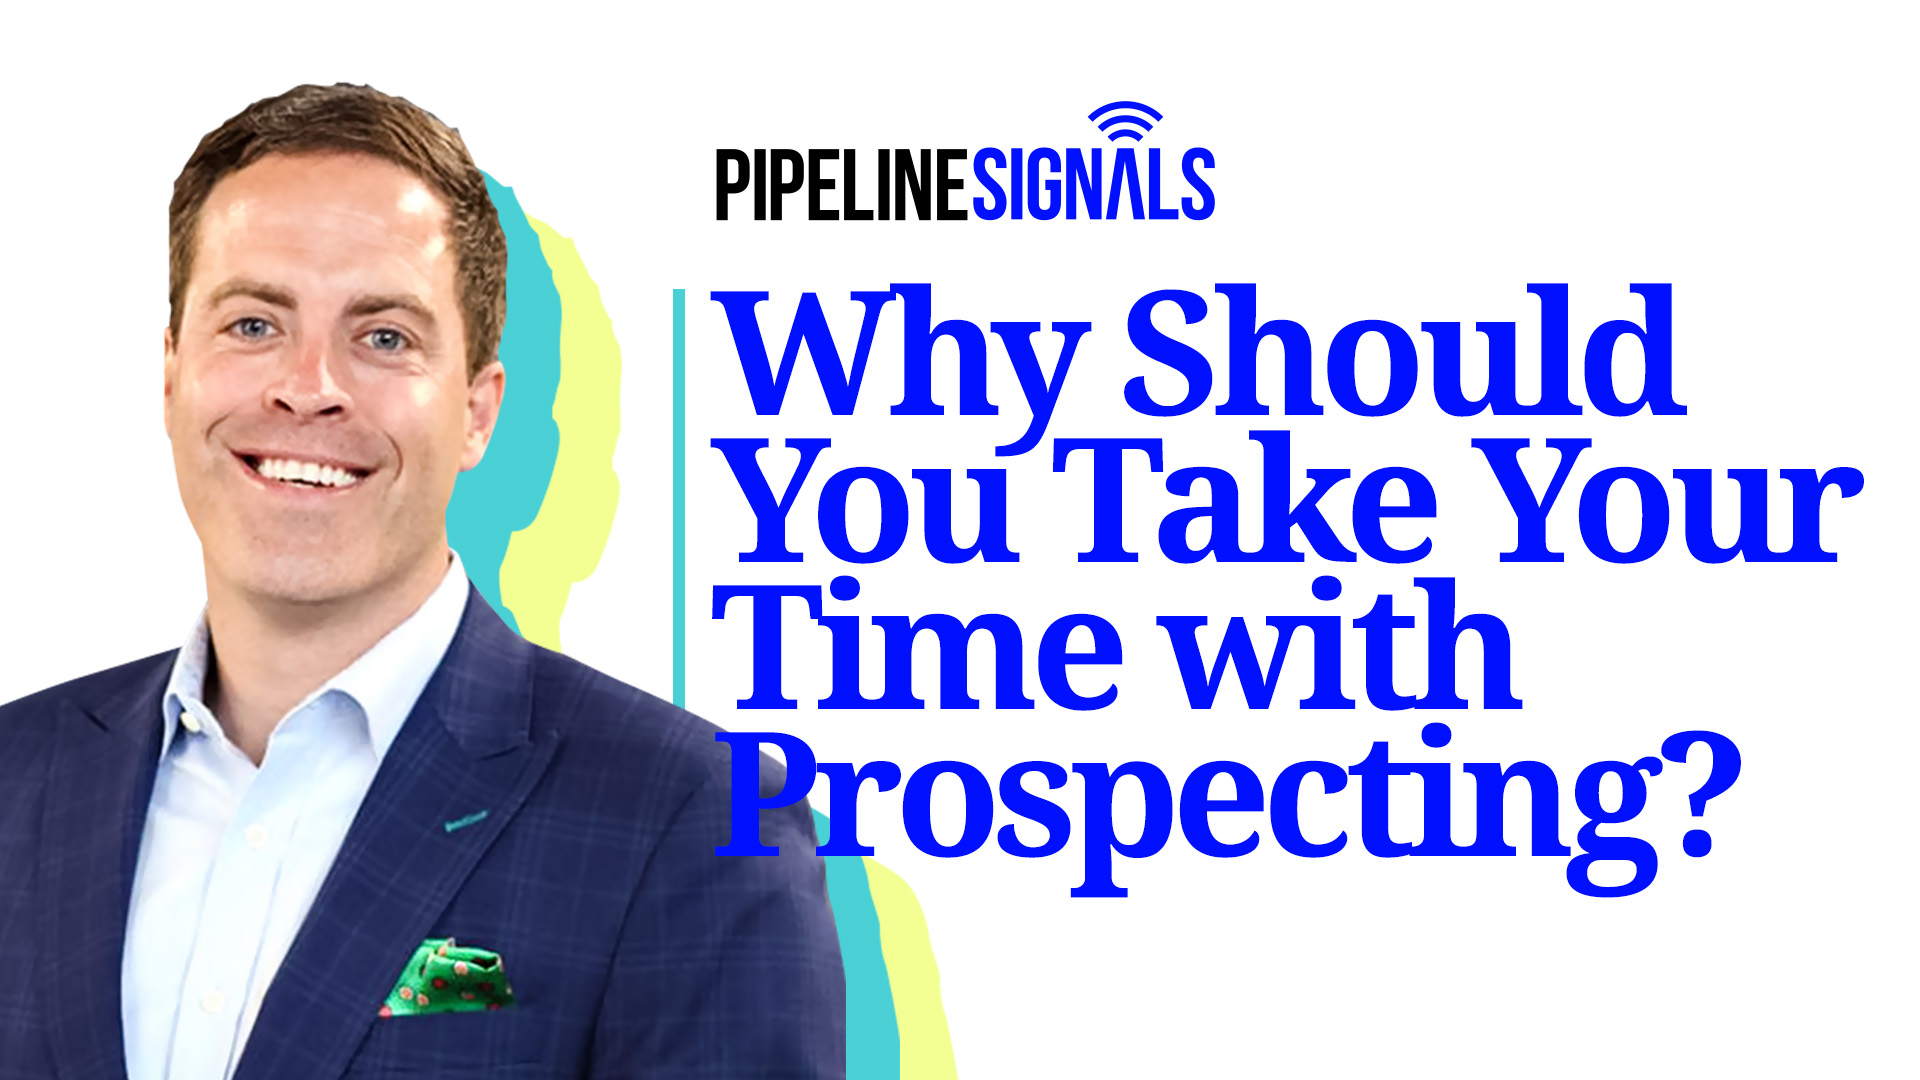 Why Should you take your time with prospecting?